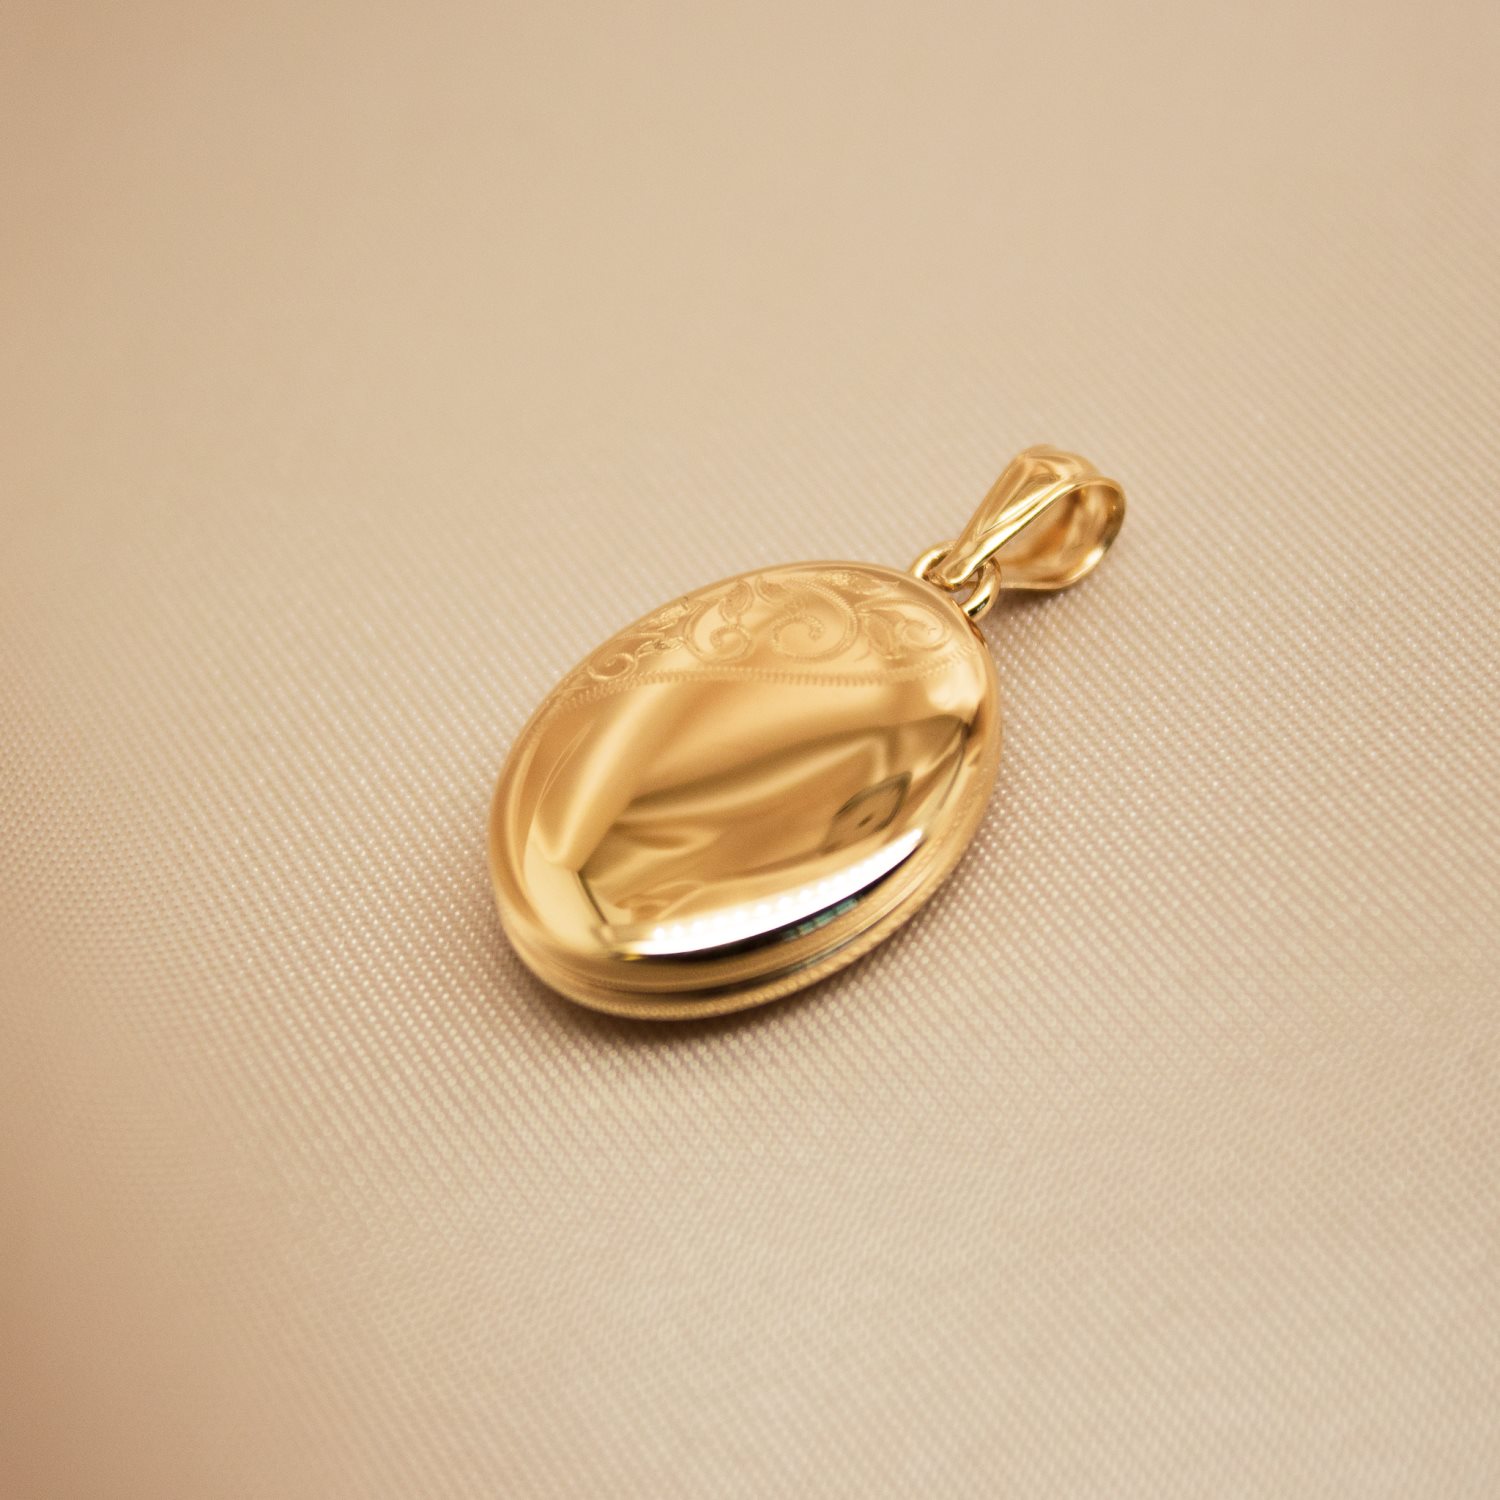 9ct Gold 15mm x 20mm Part Engraved Oval Locket - Stonex Jewellers